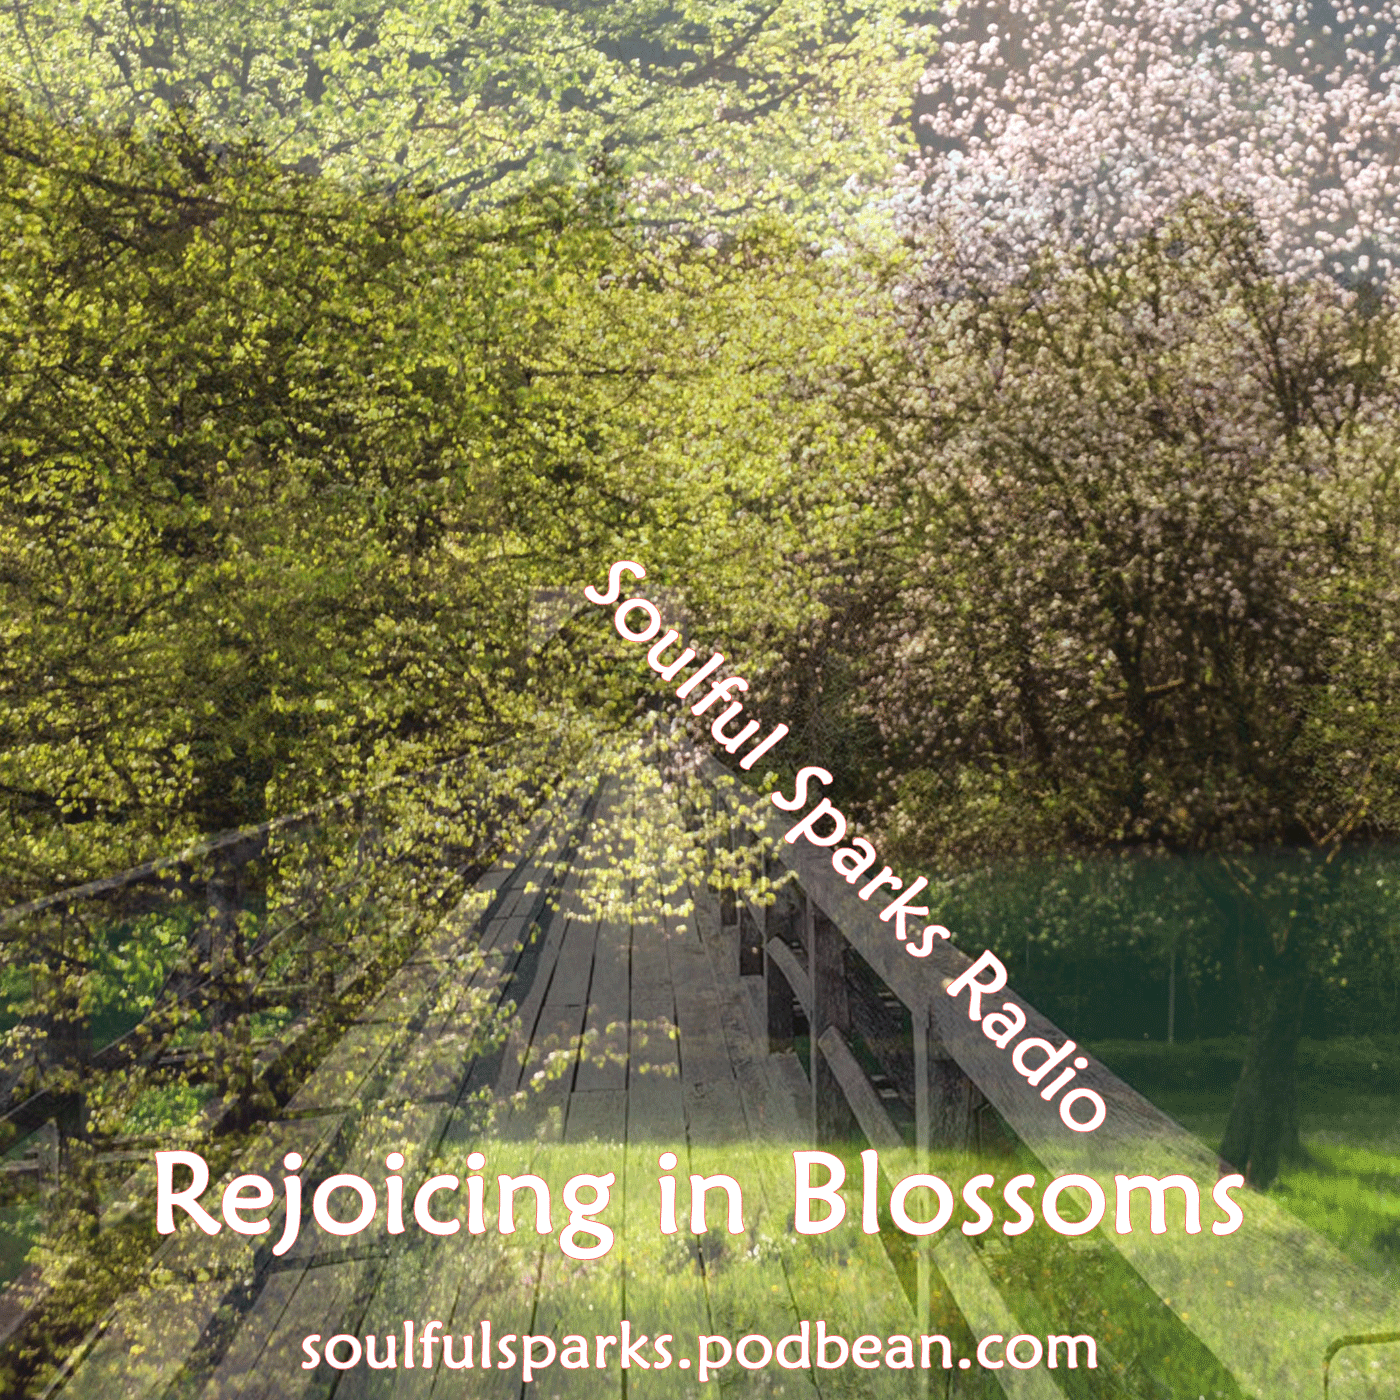 Rejoicing in Blossoms on Soulful Sparks Radio May-14-2017